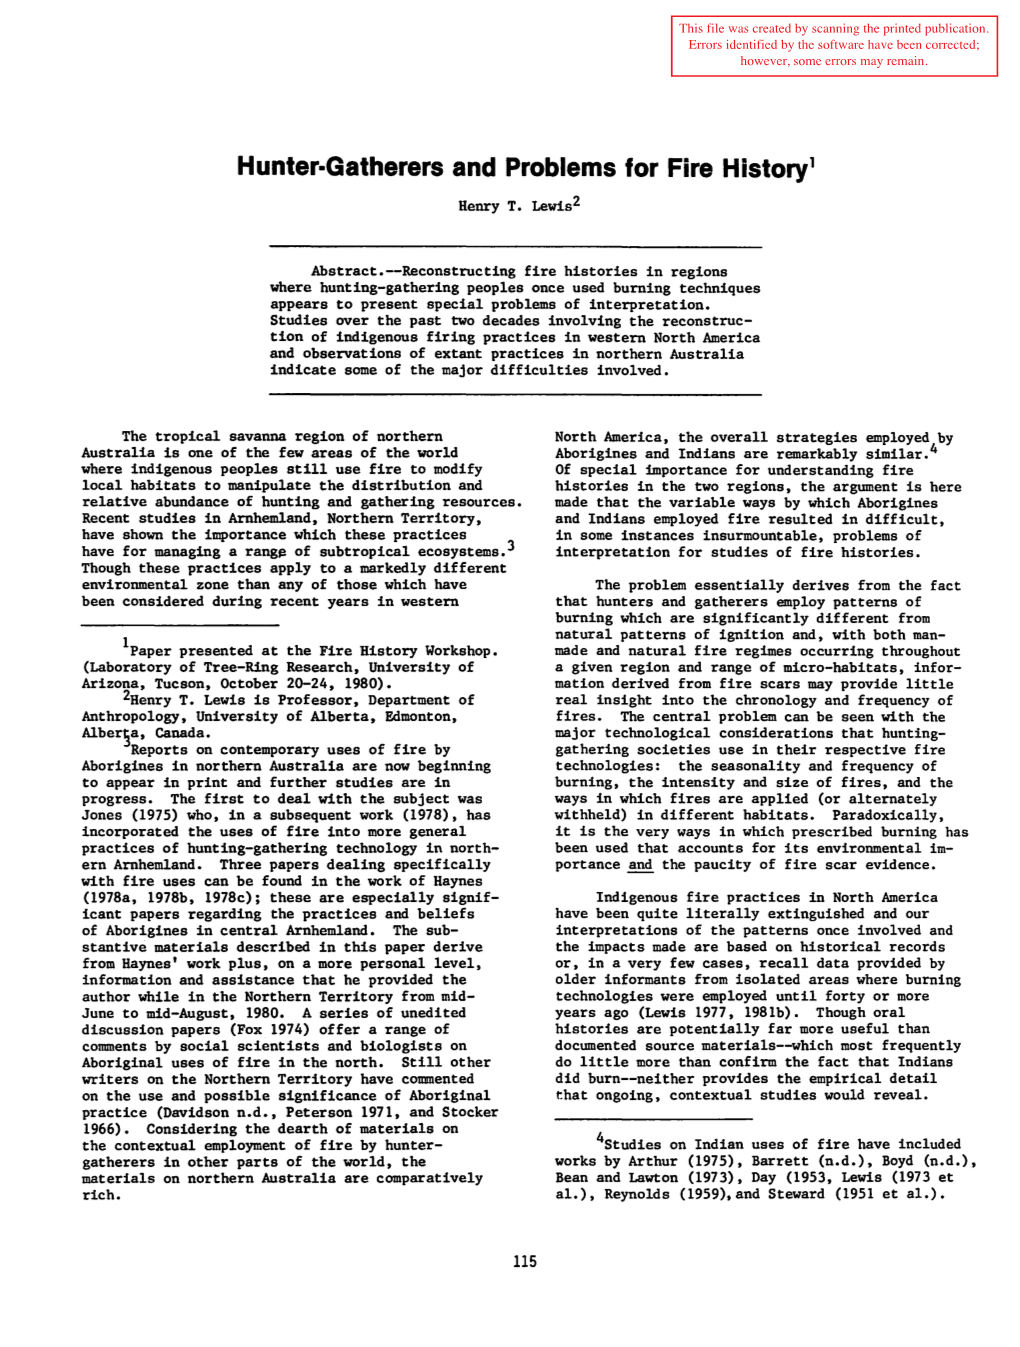 Proceedings of the Fire History Workshop; October 20-24, 1980